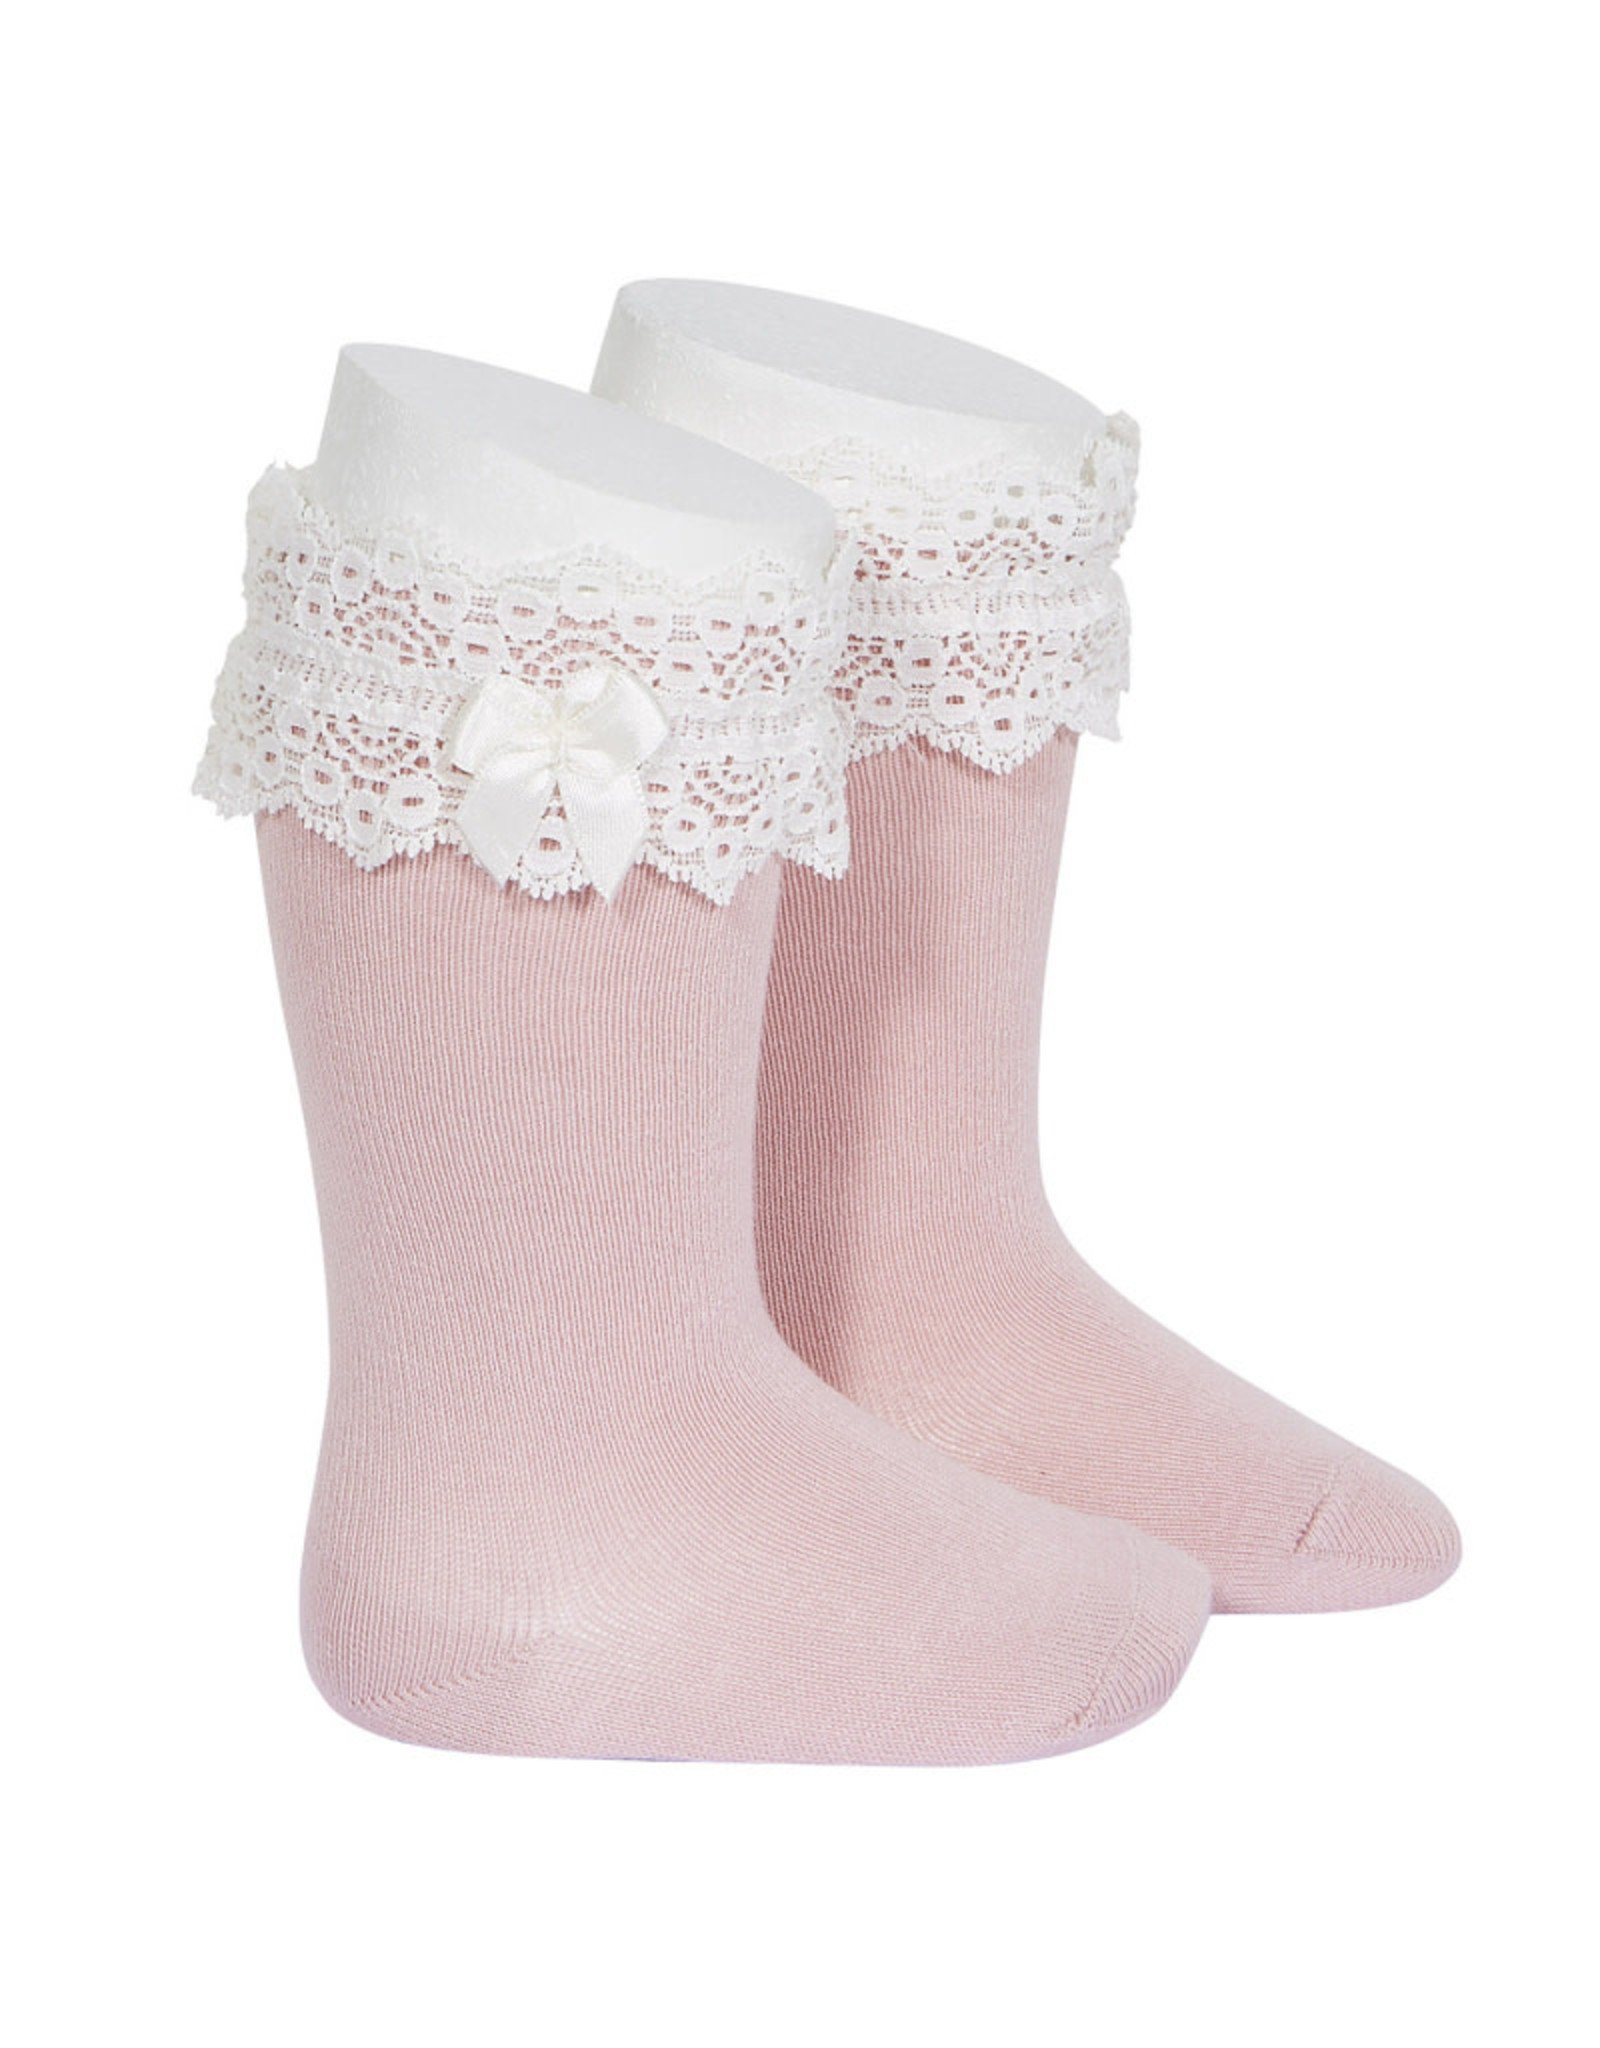 CONDOR Pale Pink Lace Trim Socks with Bow